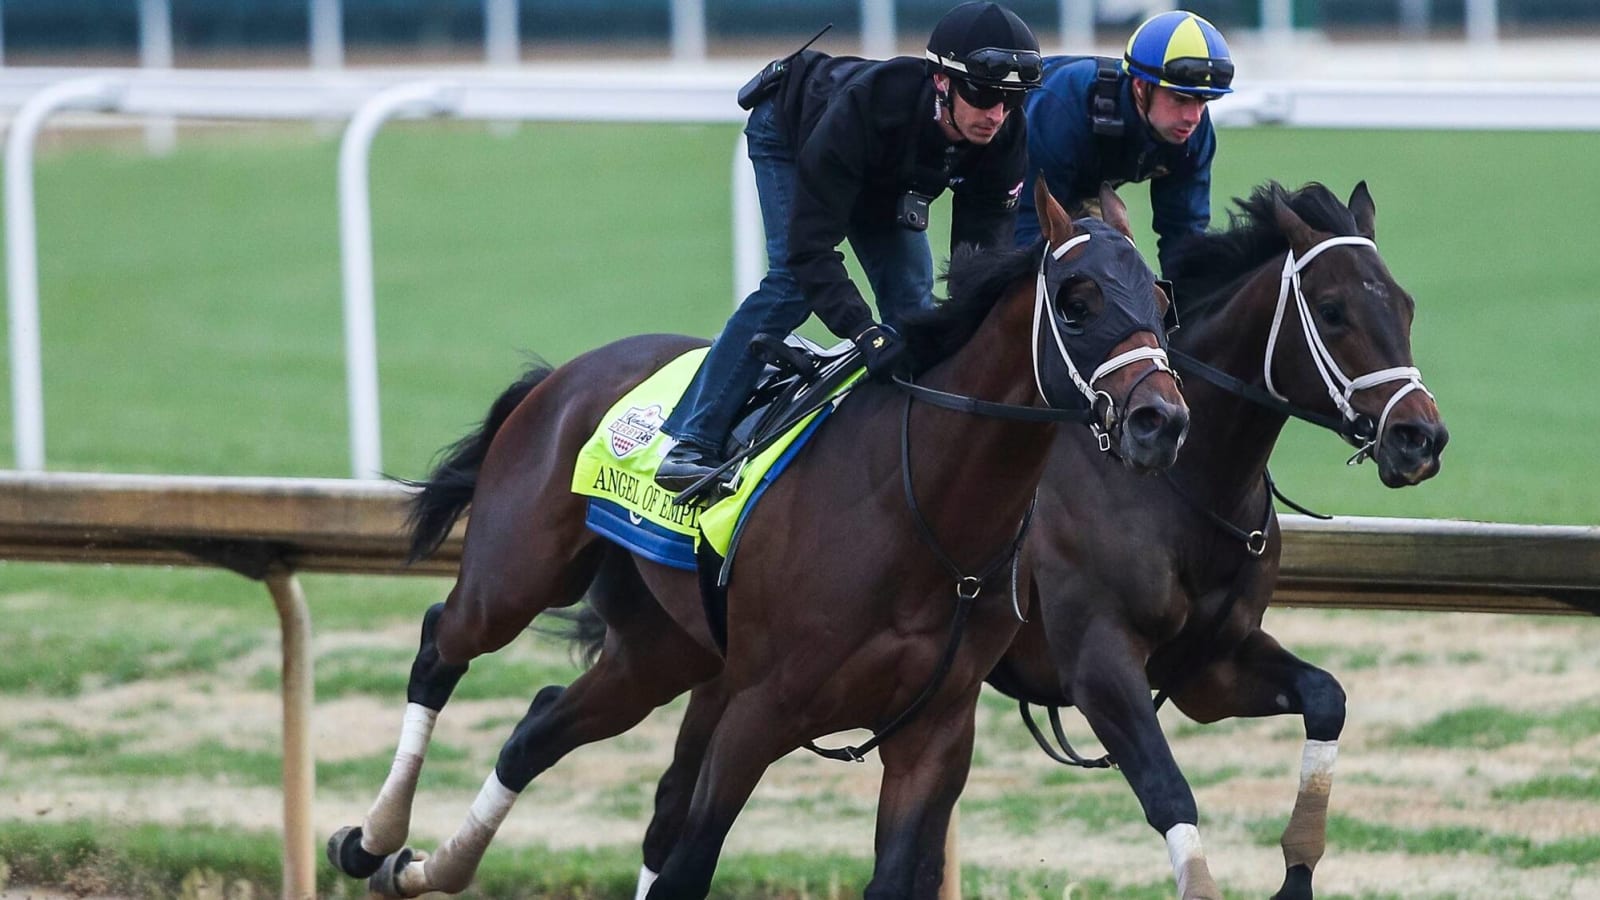 Kentucky Derby best bets A look at the rest of the field, now that